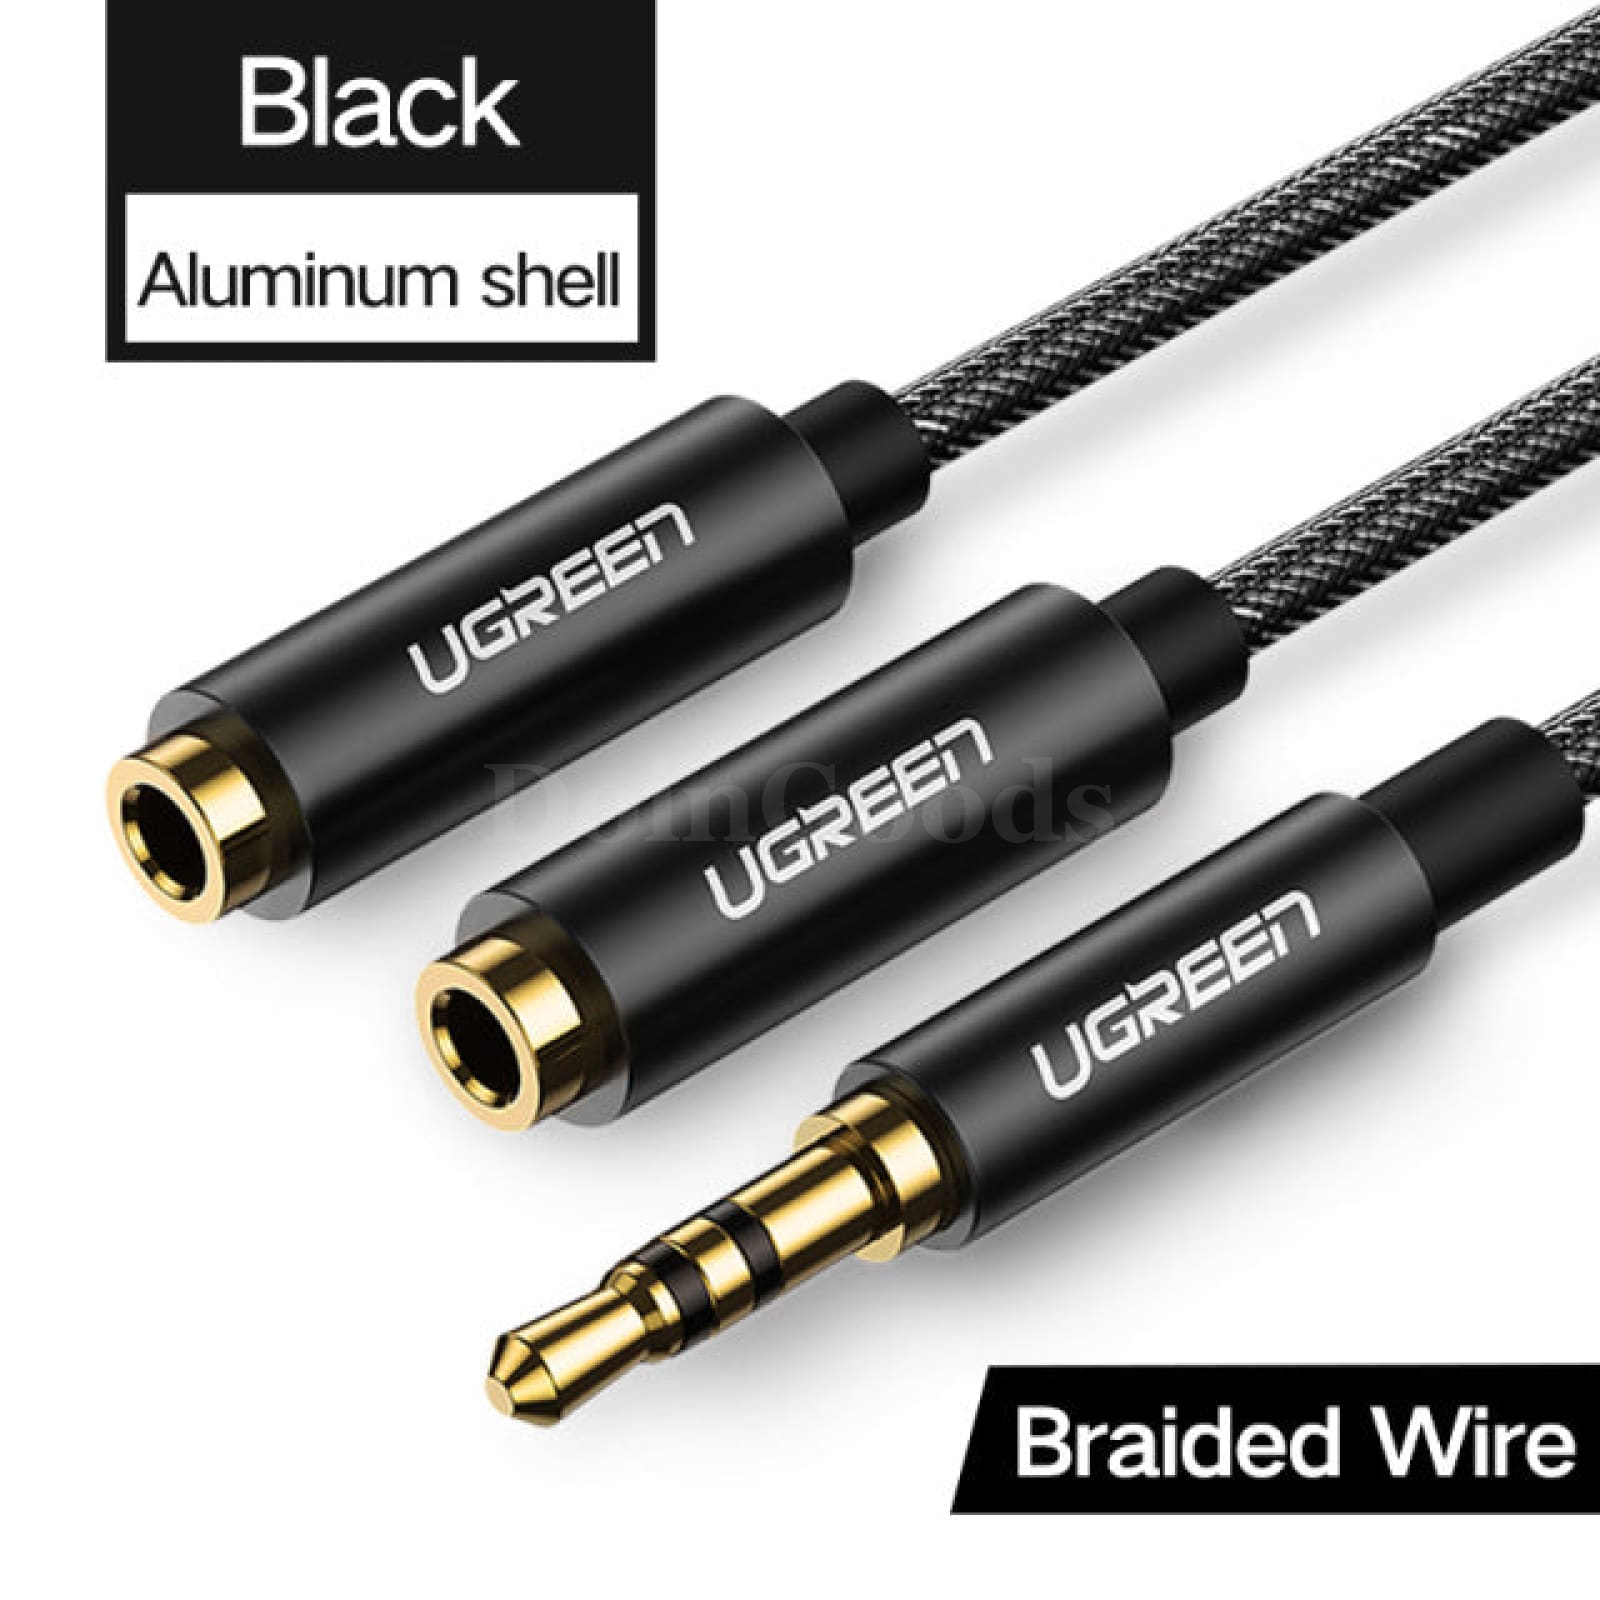 Ugreen 3.5Mm Male To Female Splitter 2 Audio Headphone Y Cable Adapter Aux Plug Aluminum Braided /